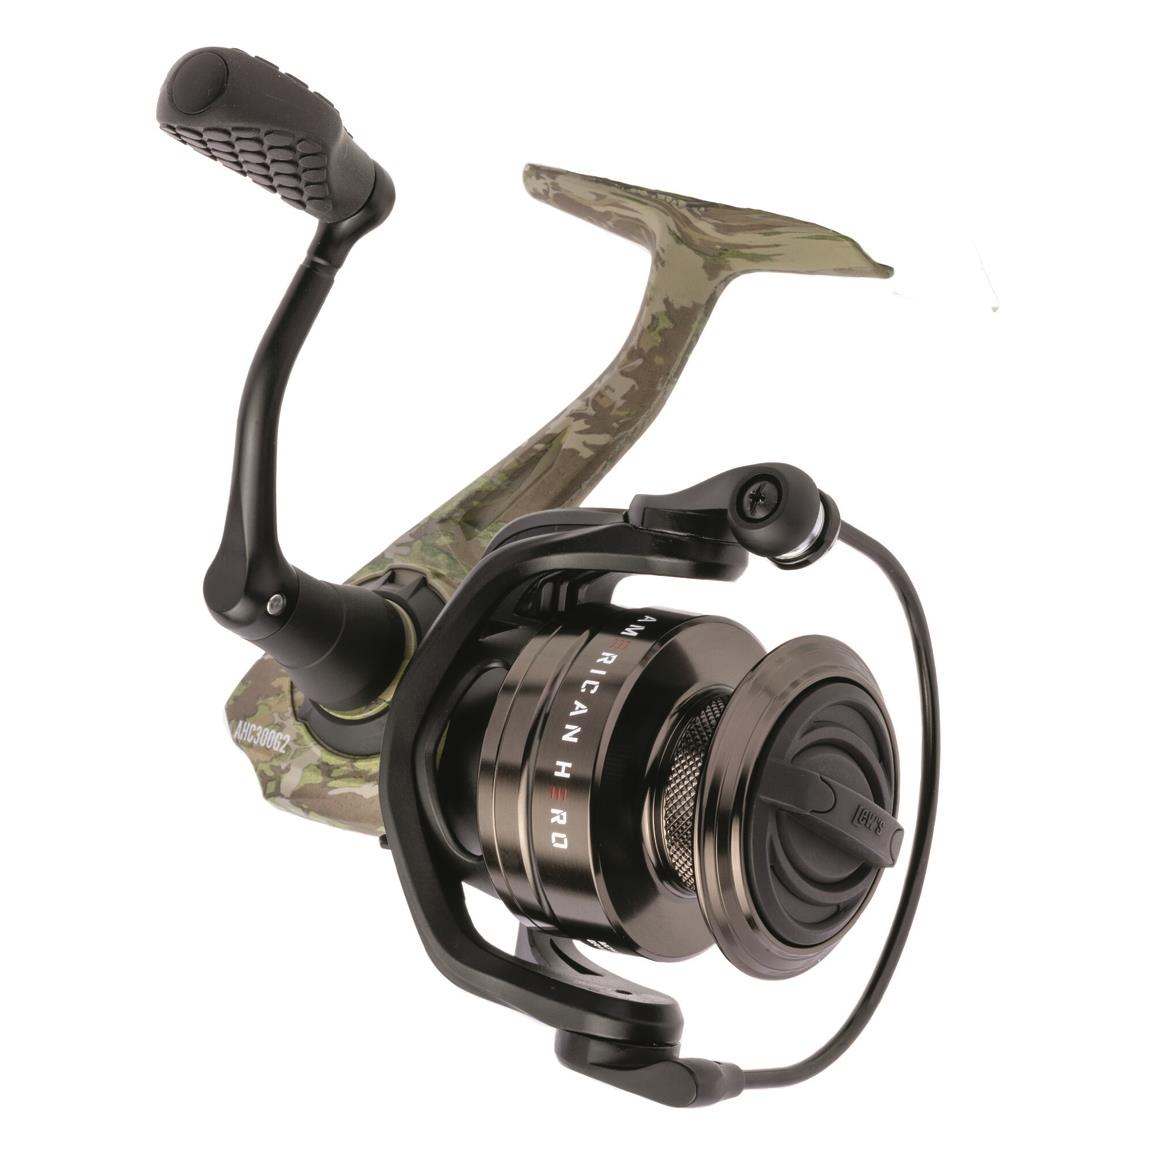 Mr. Crappie Crappie Thunder Pre-spooled Solo Jigging Reel - 732868, Spinning  Reels at Sportsman's Guide